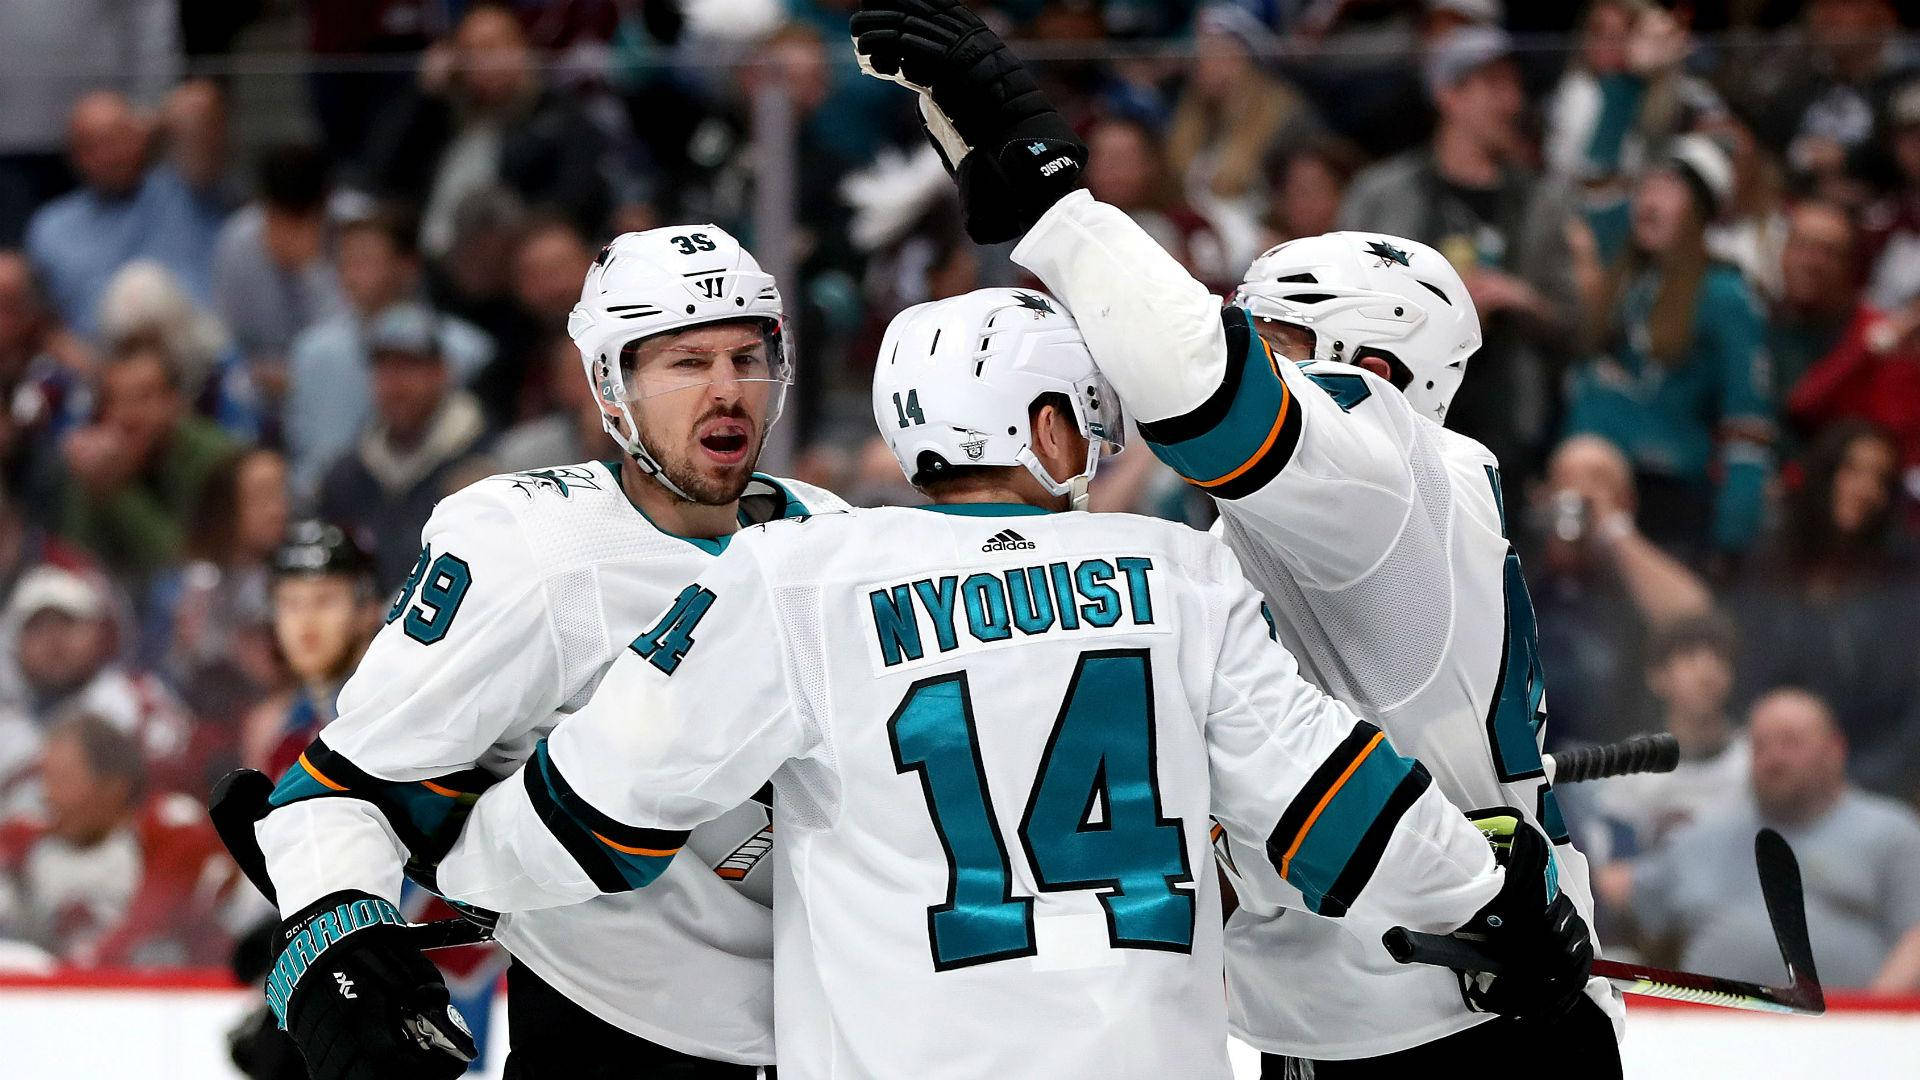 Logan Couture Celebrating His Triumph In 2019 Against The Colorado Avalanche. Background